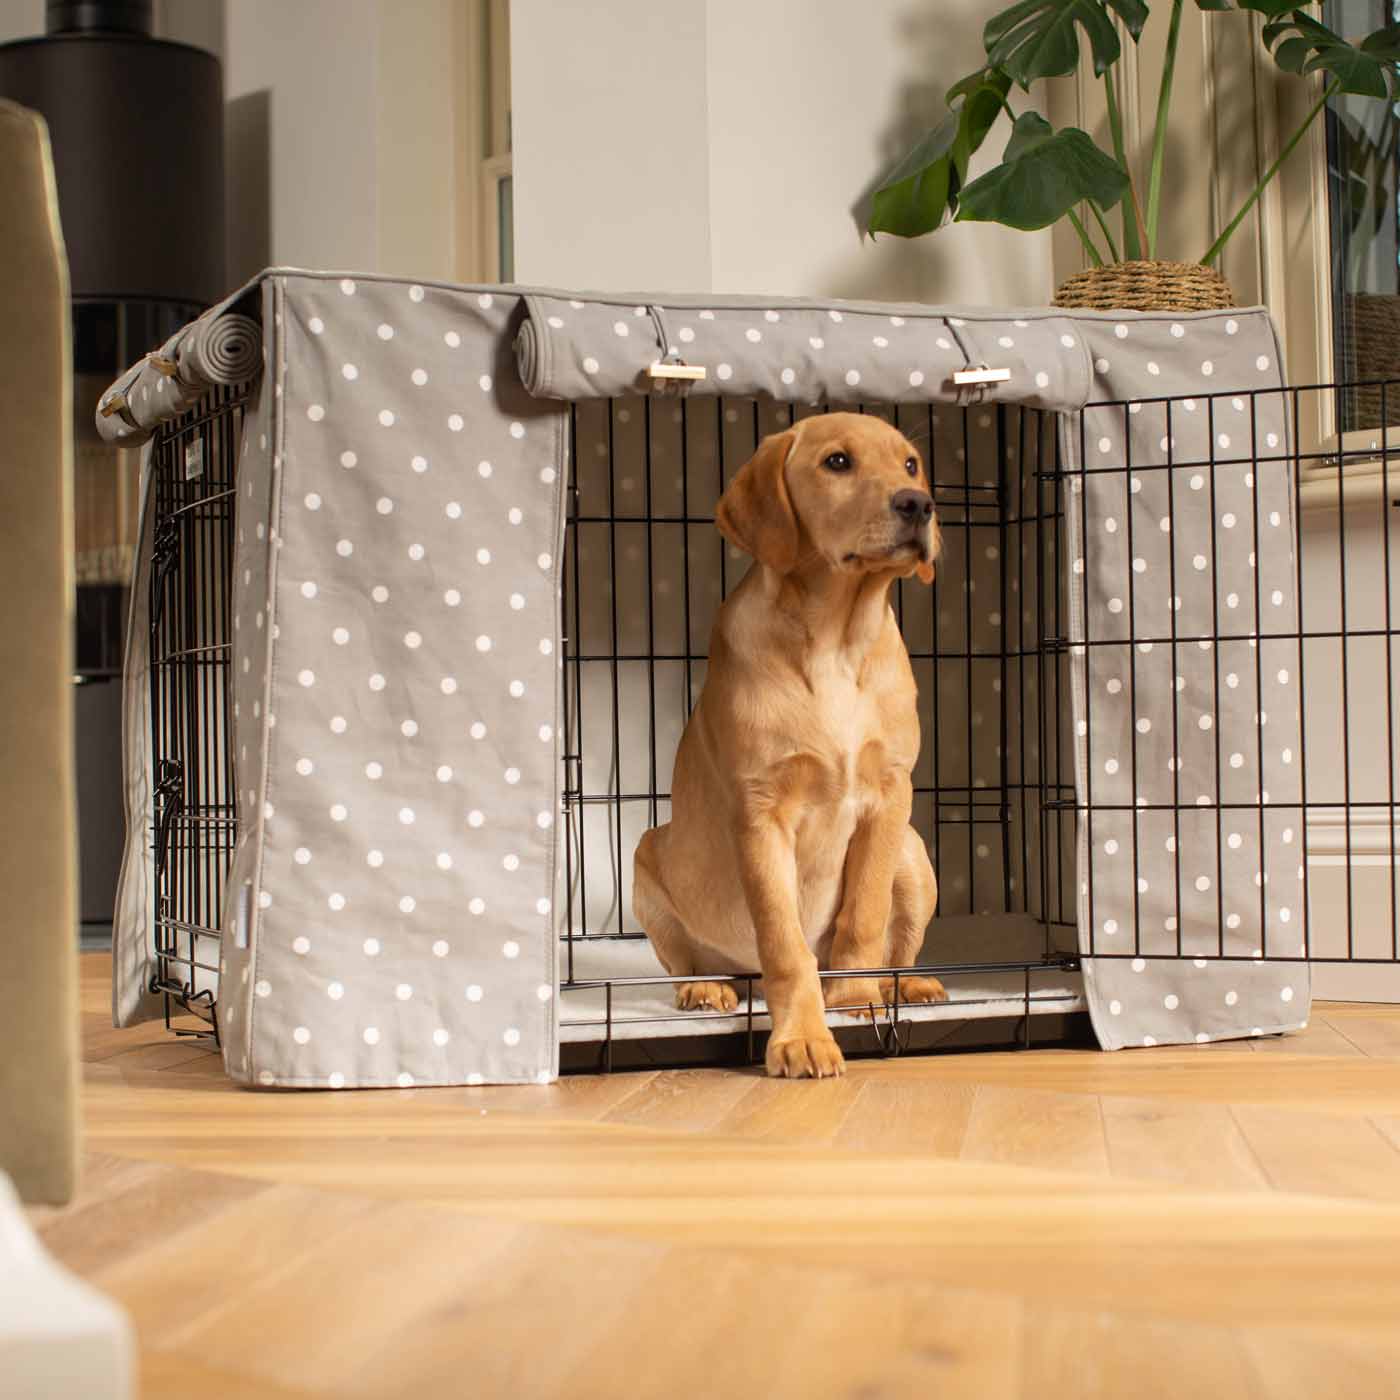 Luxury Dog Crate Cover, Grey Spot Cotton Crate Cover The Perfect Dog Crate Accessory, Available To Personalise Now at Lords & Labradors